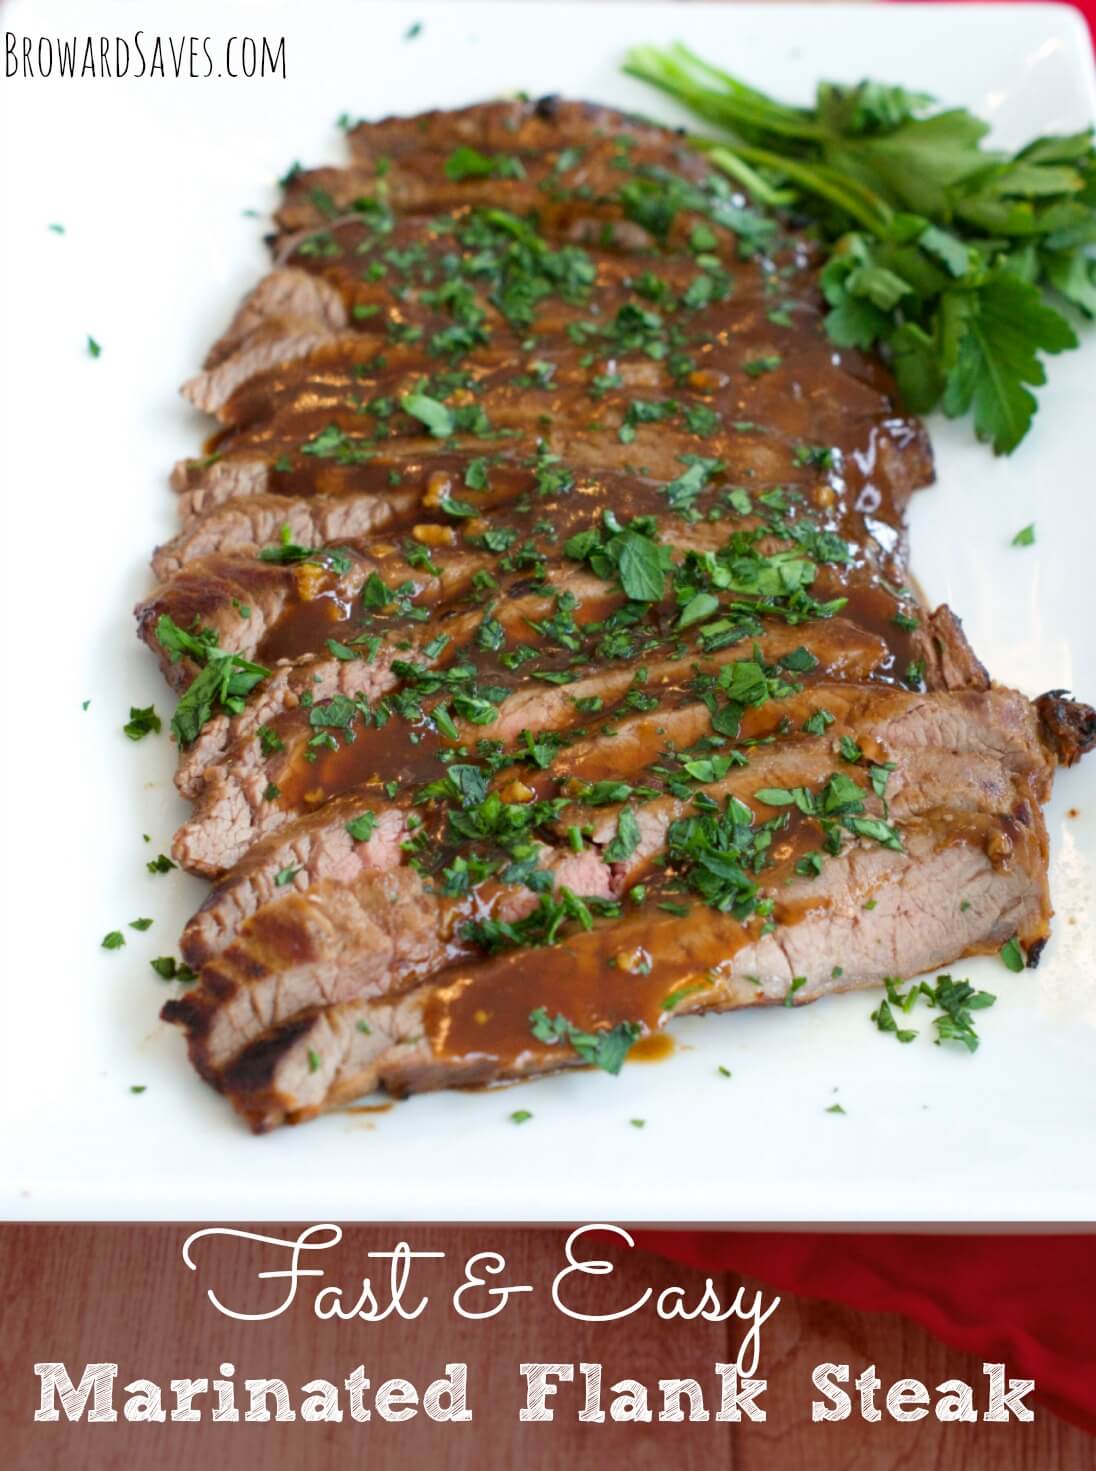 Marinated Flank Steak Dinner Recipe from Living Sweet Moments